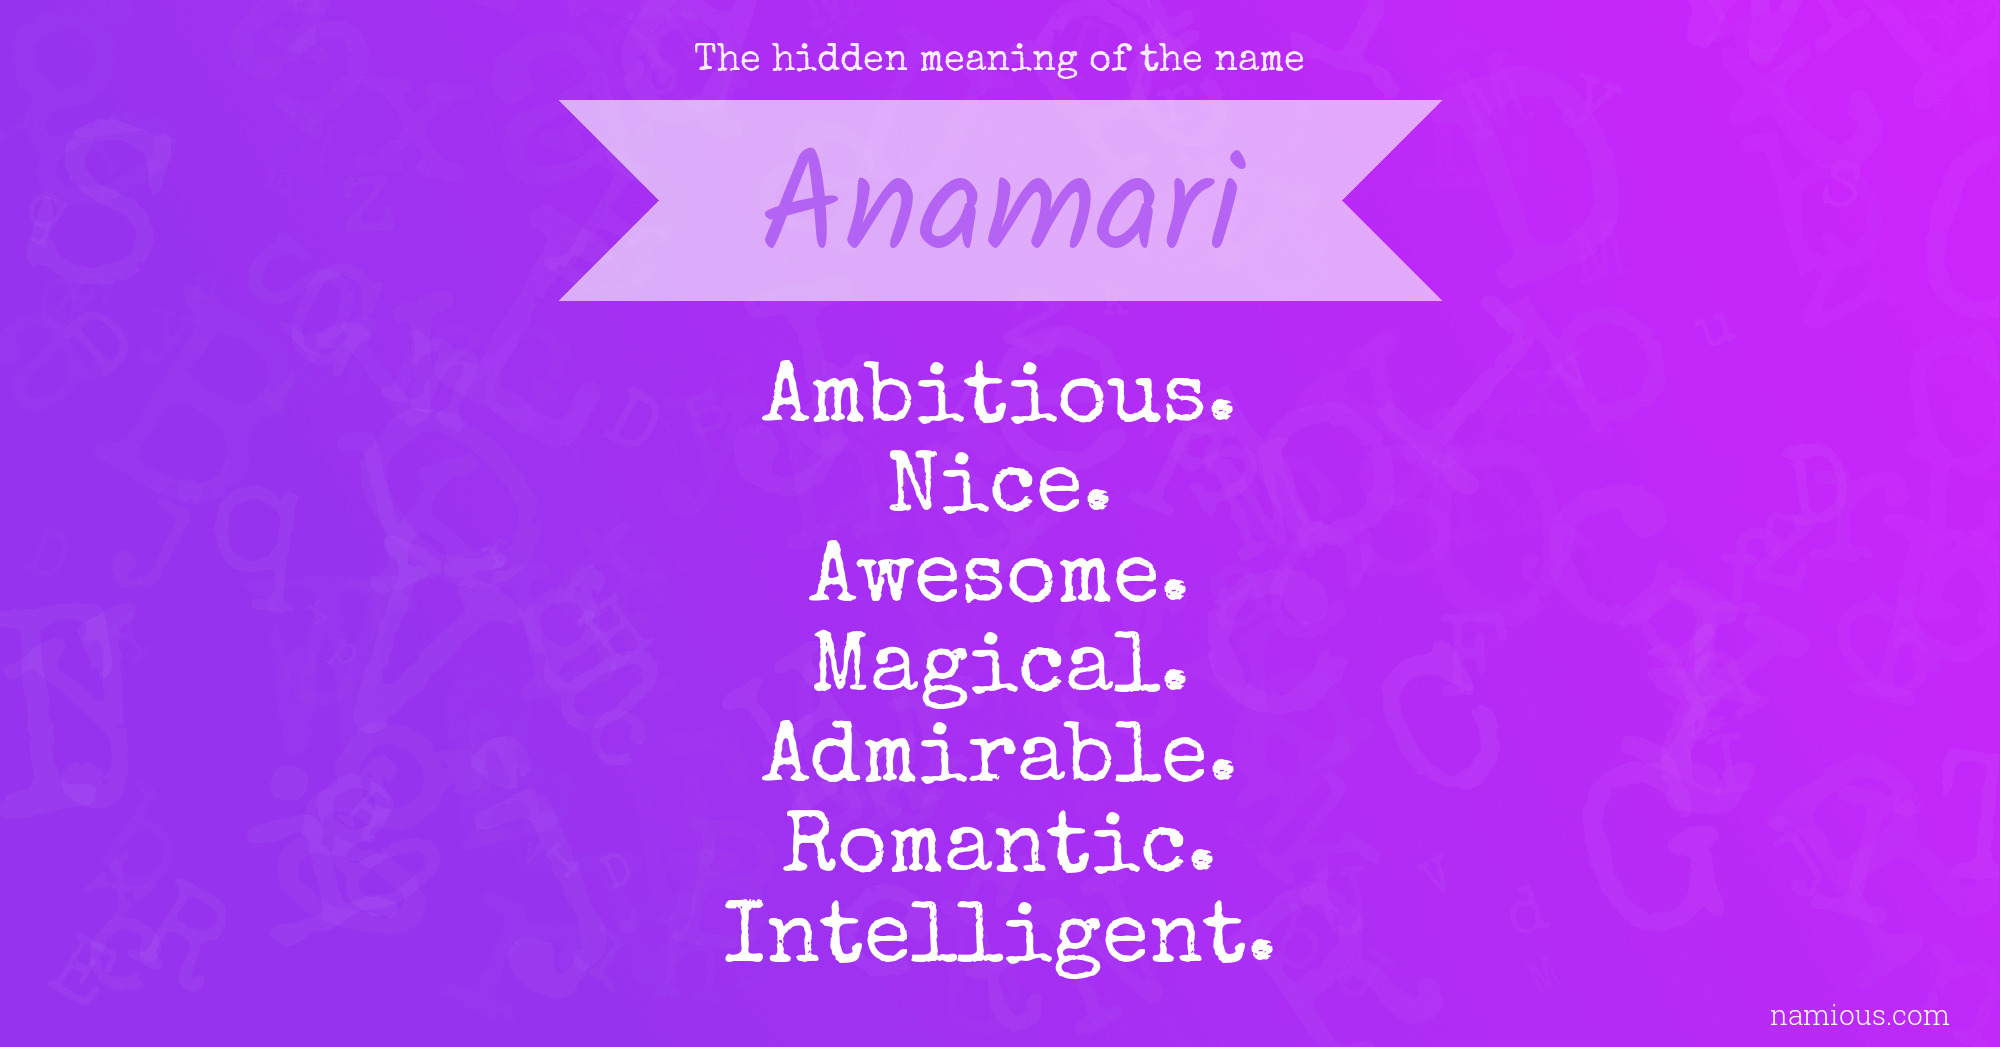 The hidden meaning of the name Anamari